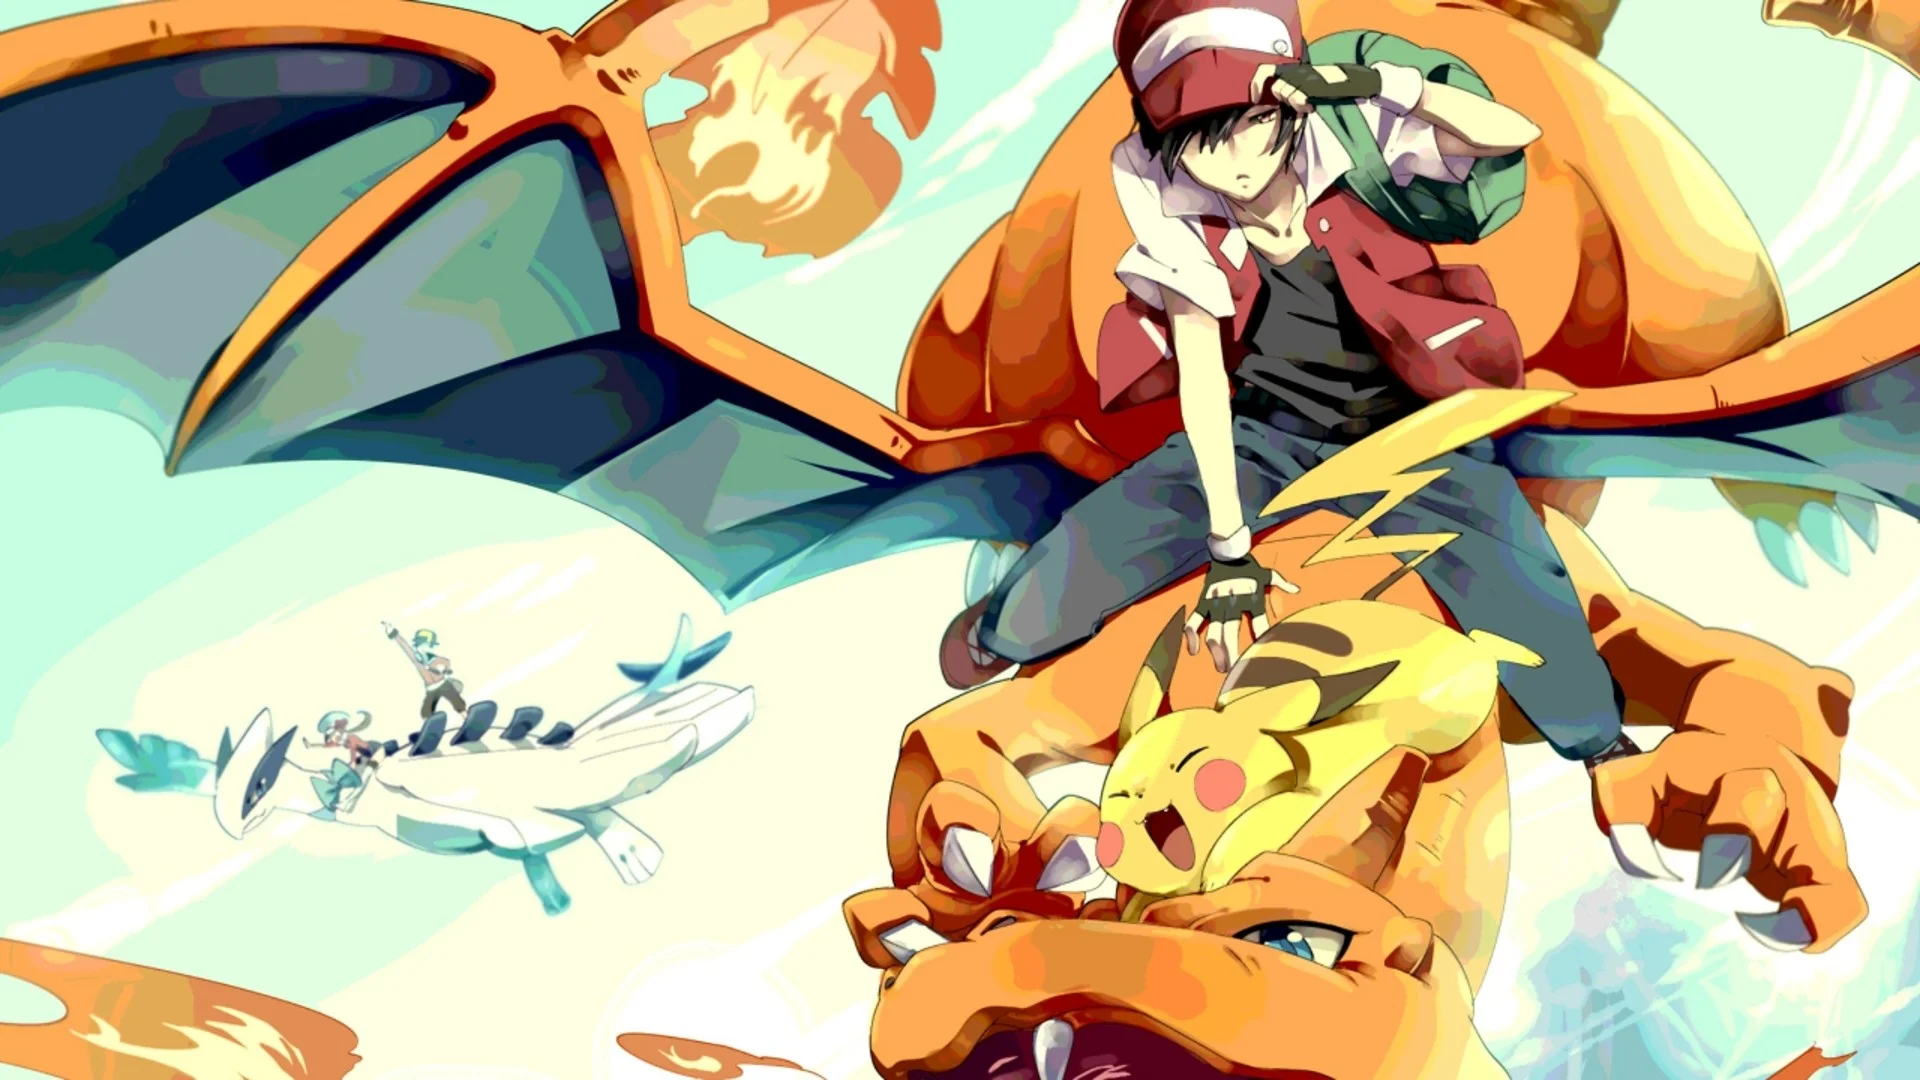 Red, the Pokemon Champion of the Kanto region. Oh, look theres gold in the back